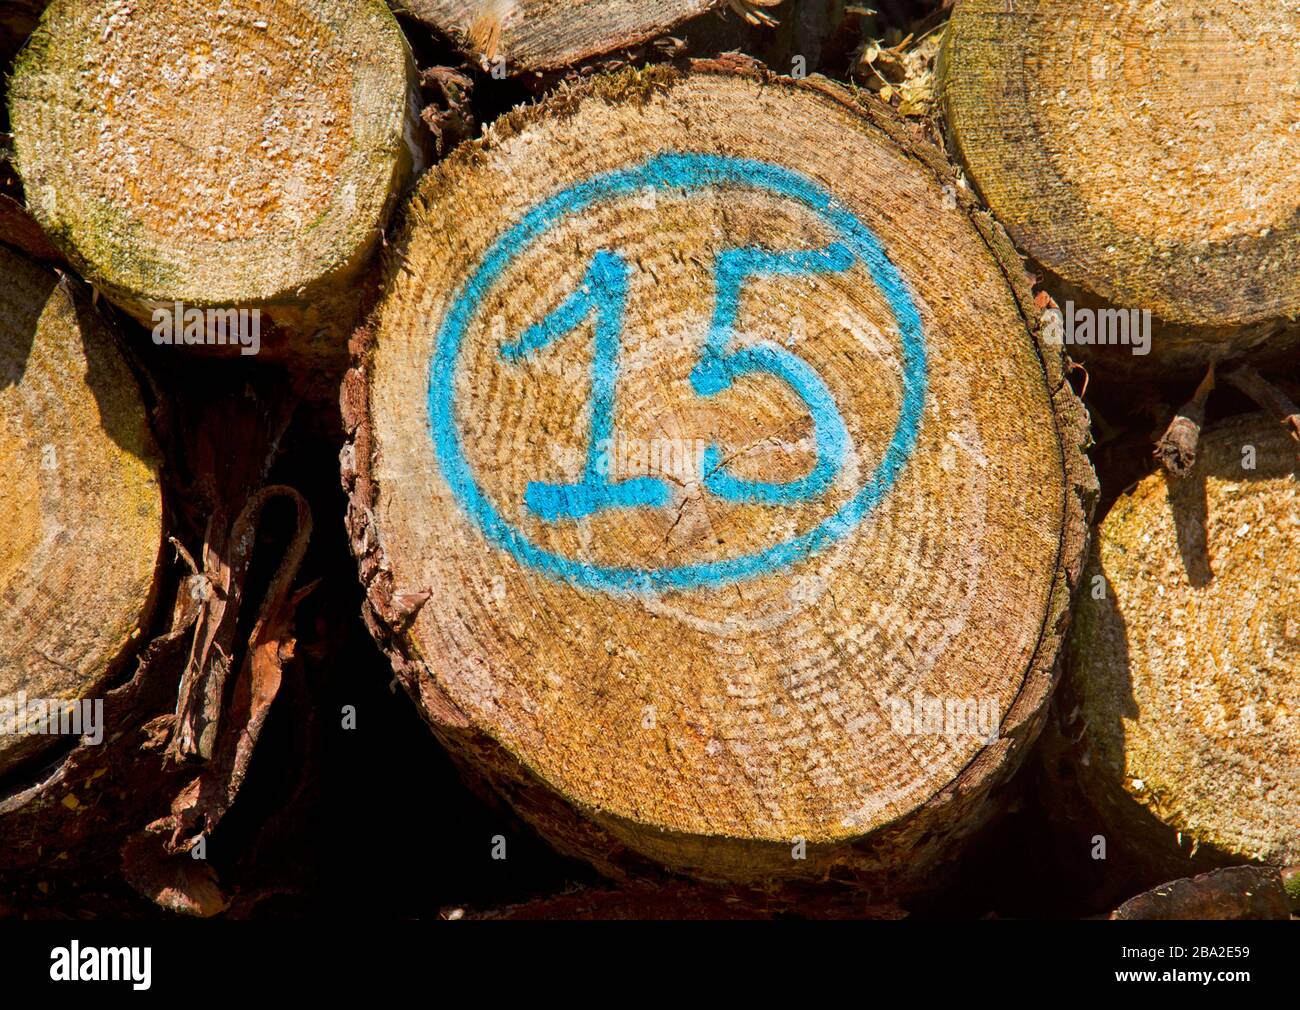 Heap of tree stems, one of them marked in blue with number 15 Stock Photo